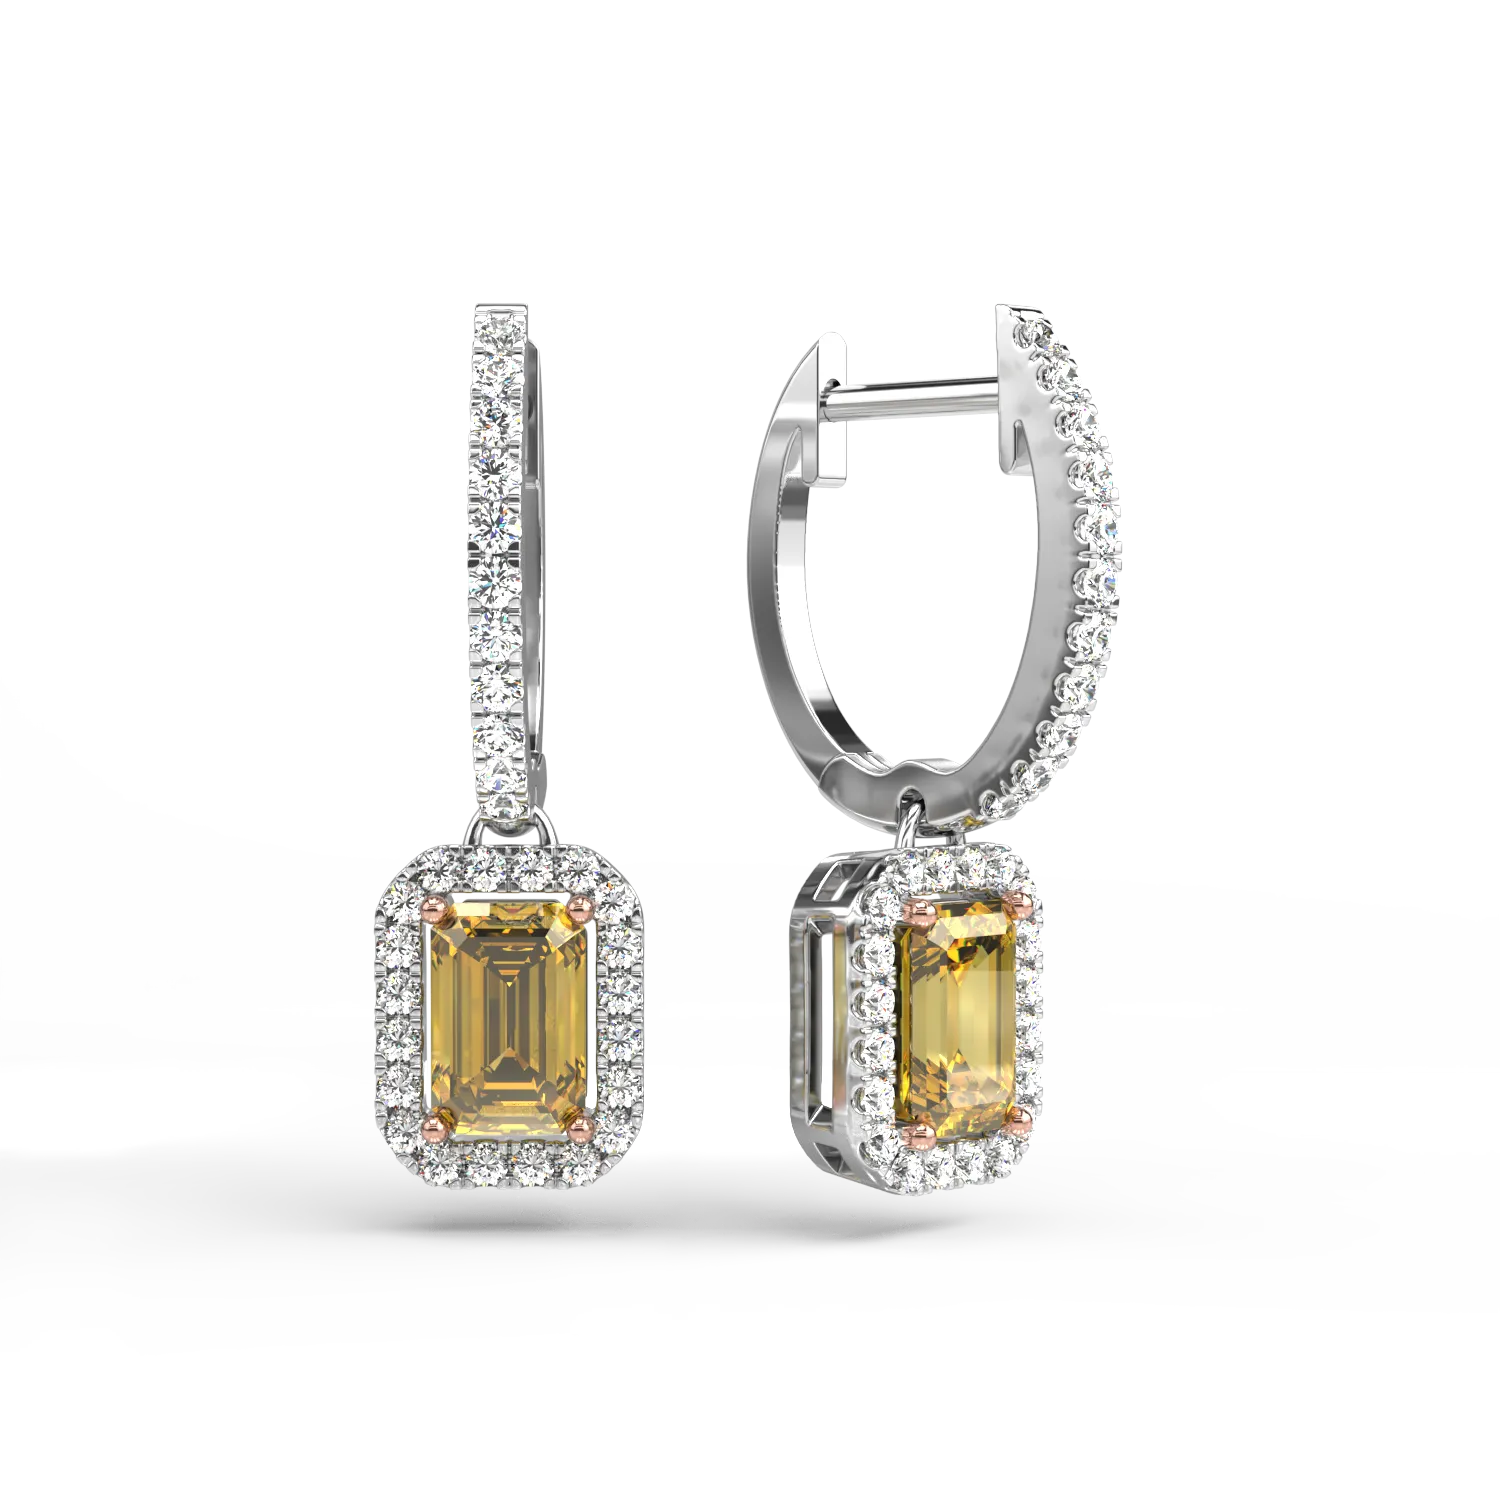 18K white gold earrings with 1.11ct yellow sapphires and 0.37ct diamonds